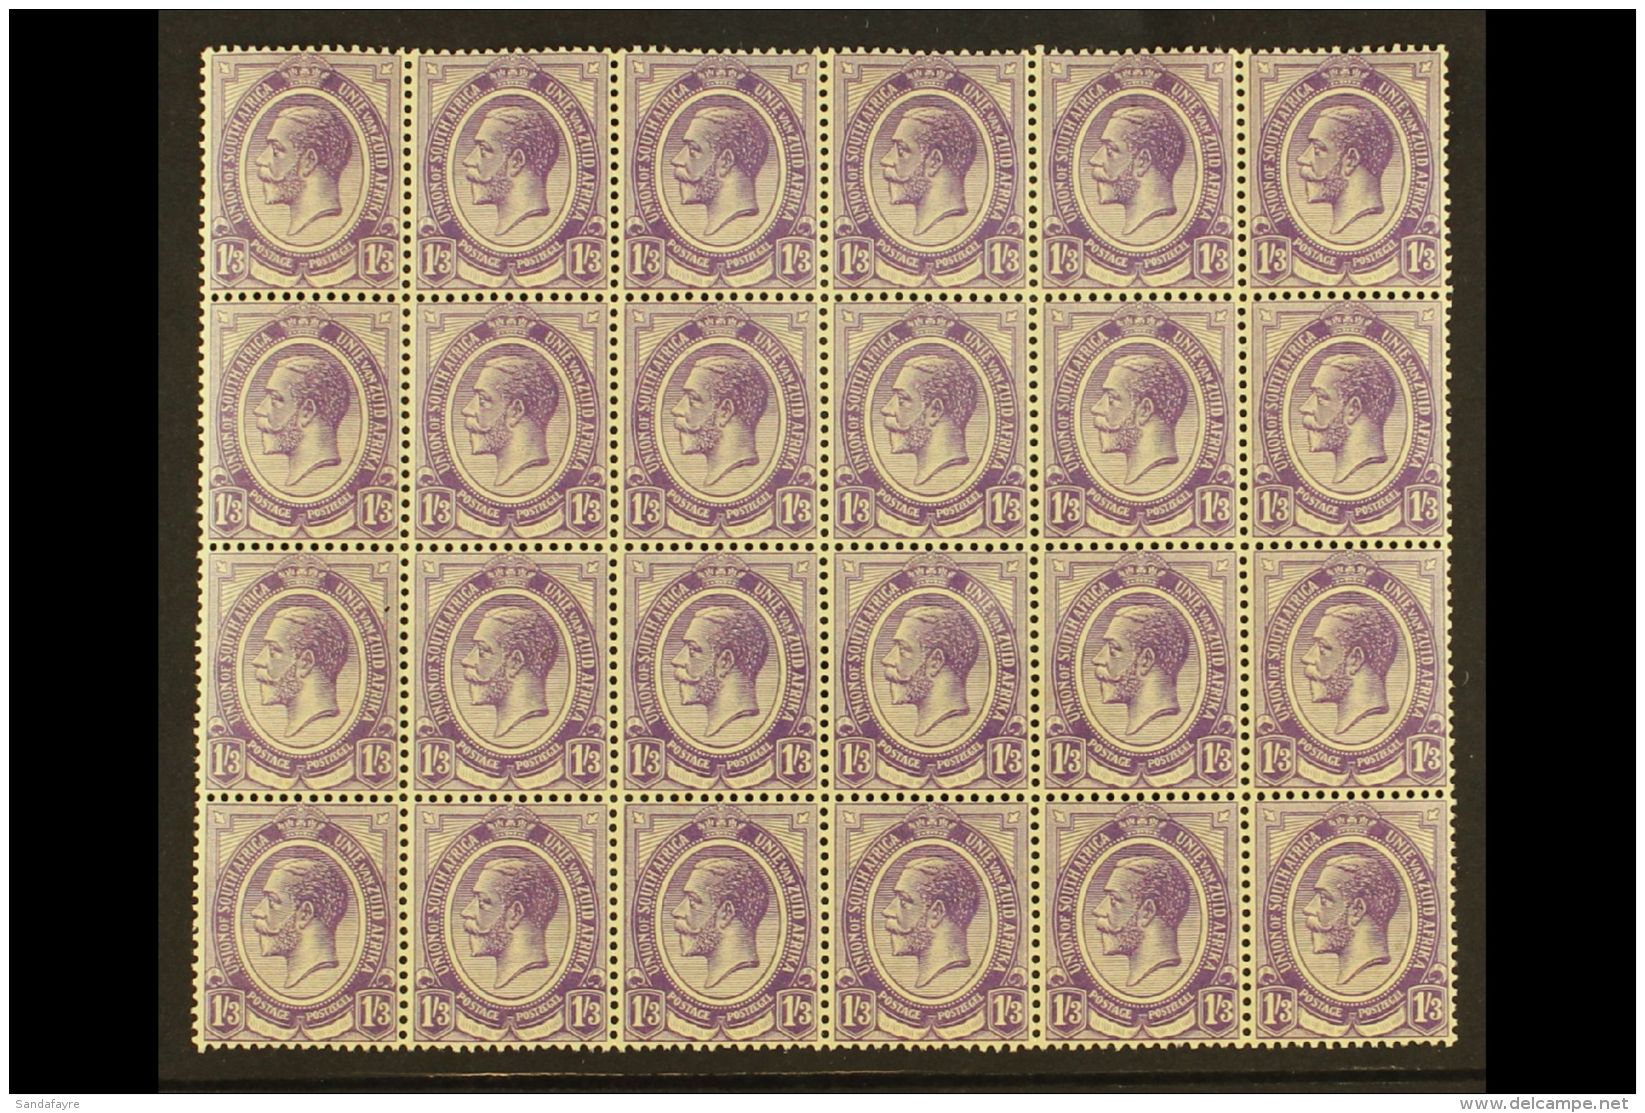 1913-24 1s3d Violet, BLOCK OF 24, SG 13, Light Age Marks On Four Stamps, Otherwise Never Hinged Mint. Scarce Large... - Non Classés